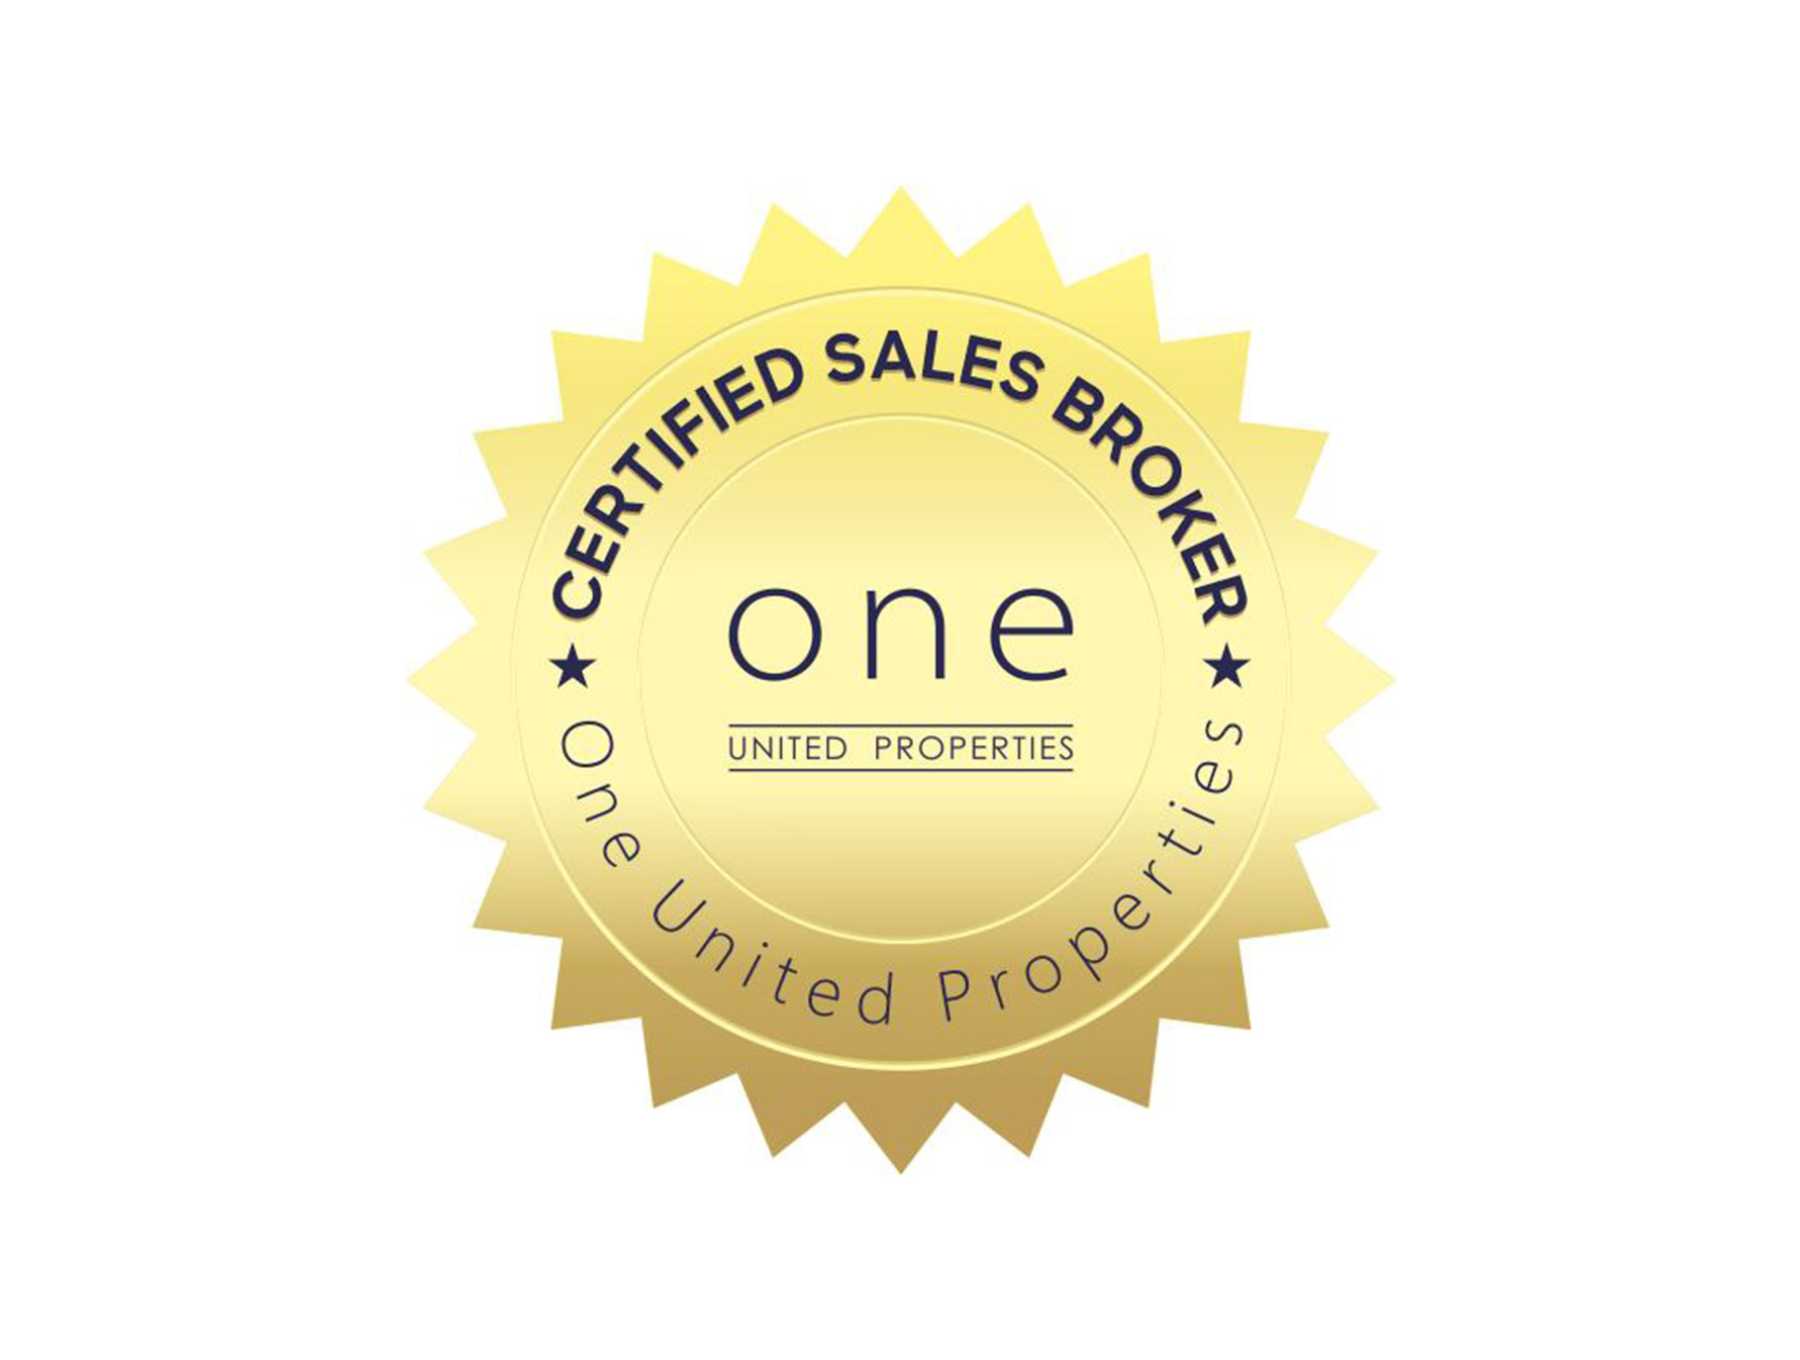 8 real estate agencies recognized by One United Properties as a Certified Sales Brokers